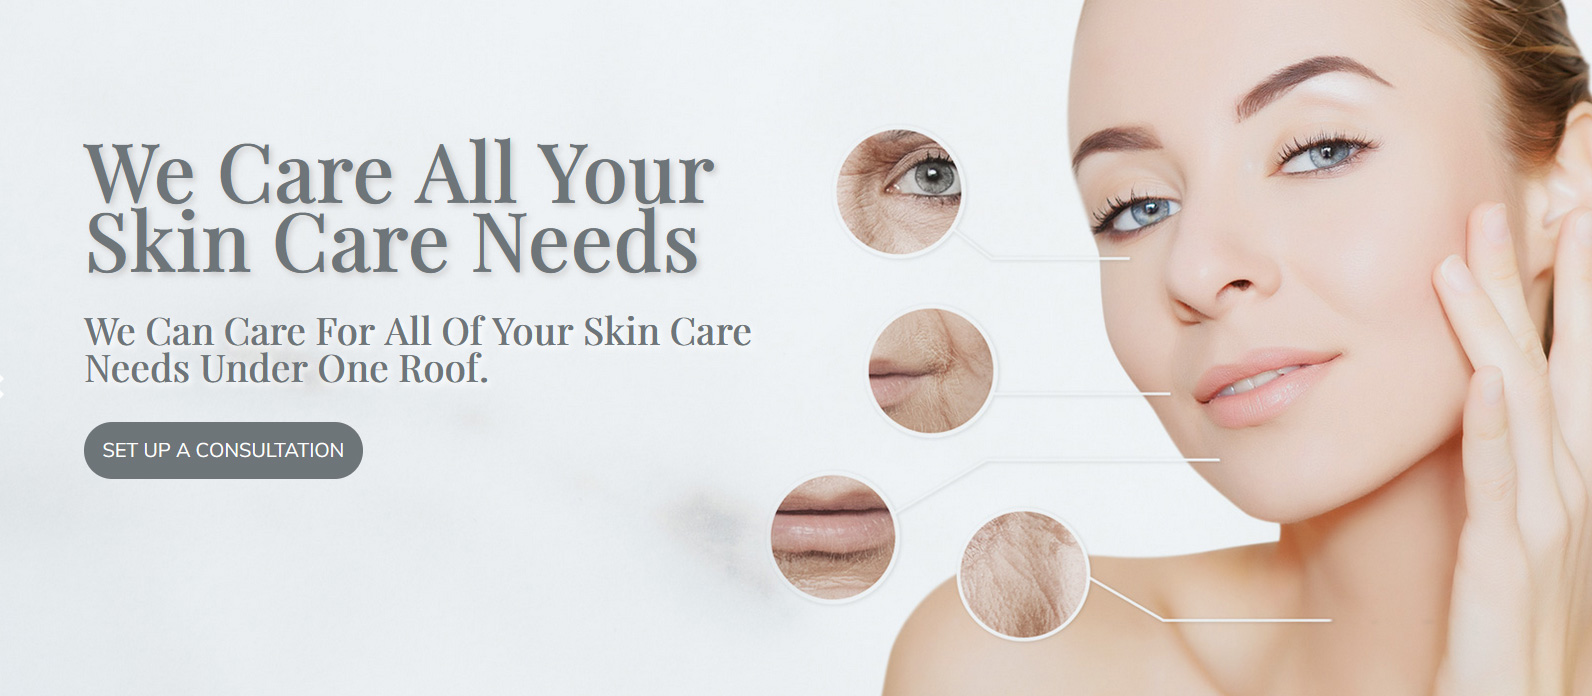 Derm SkinCare  Care for your skin. Care for your life.